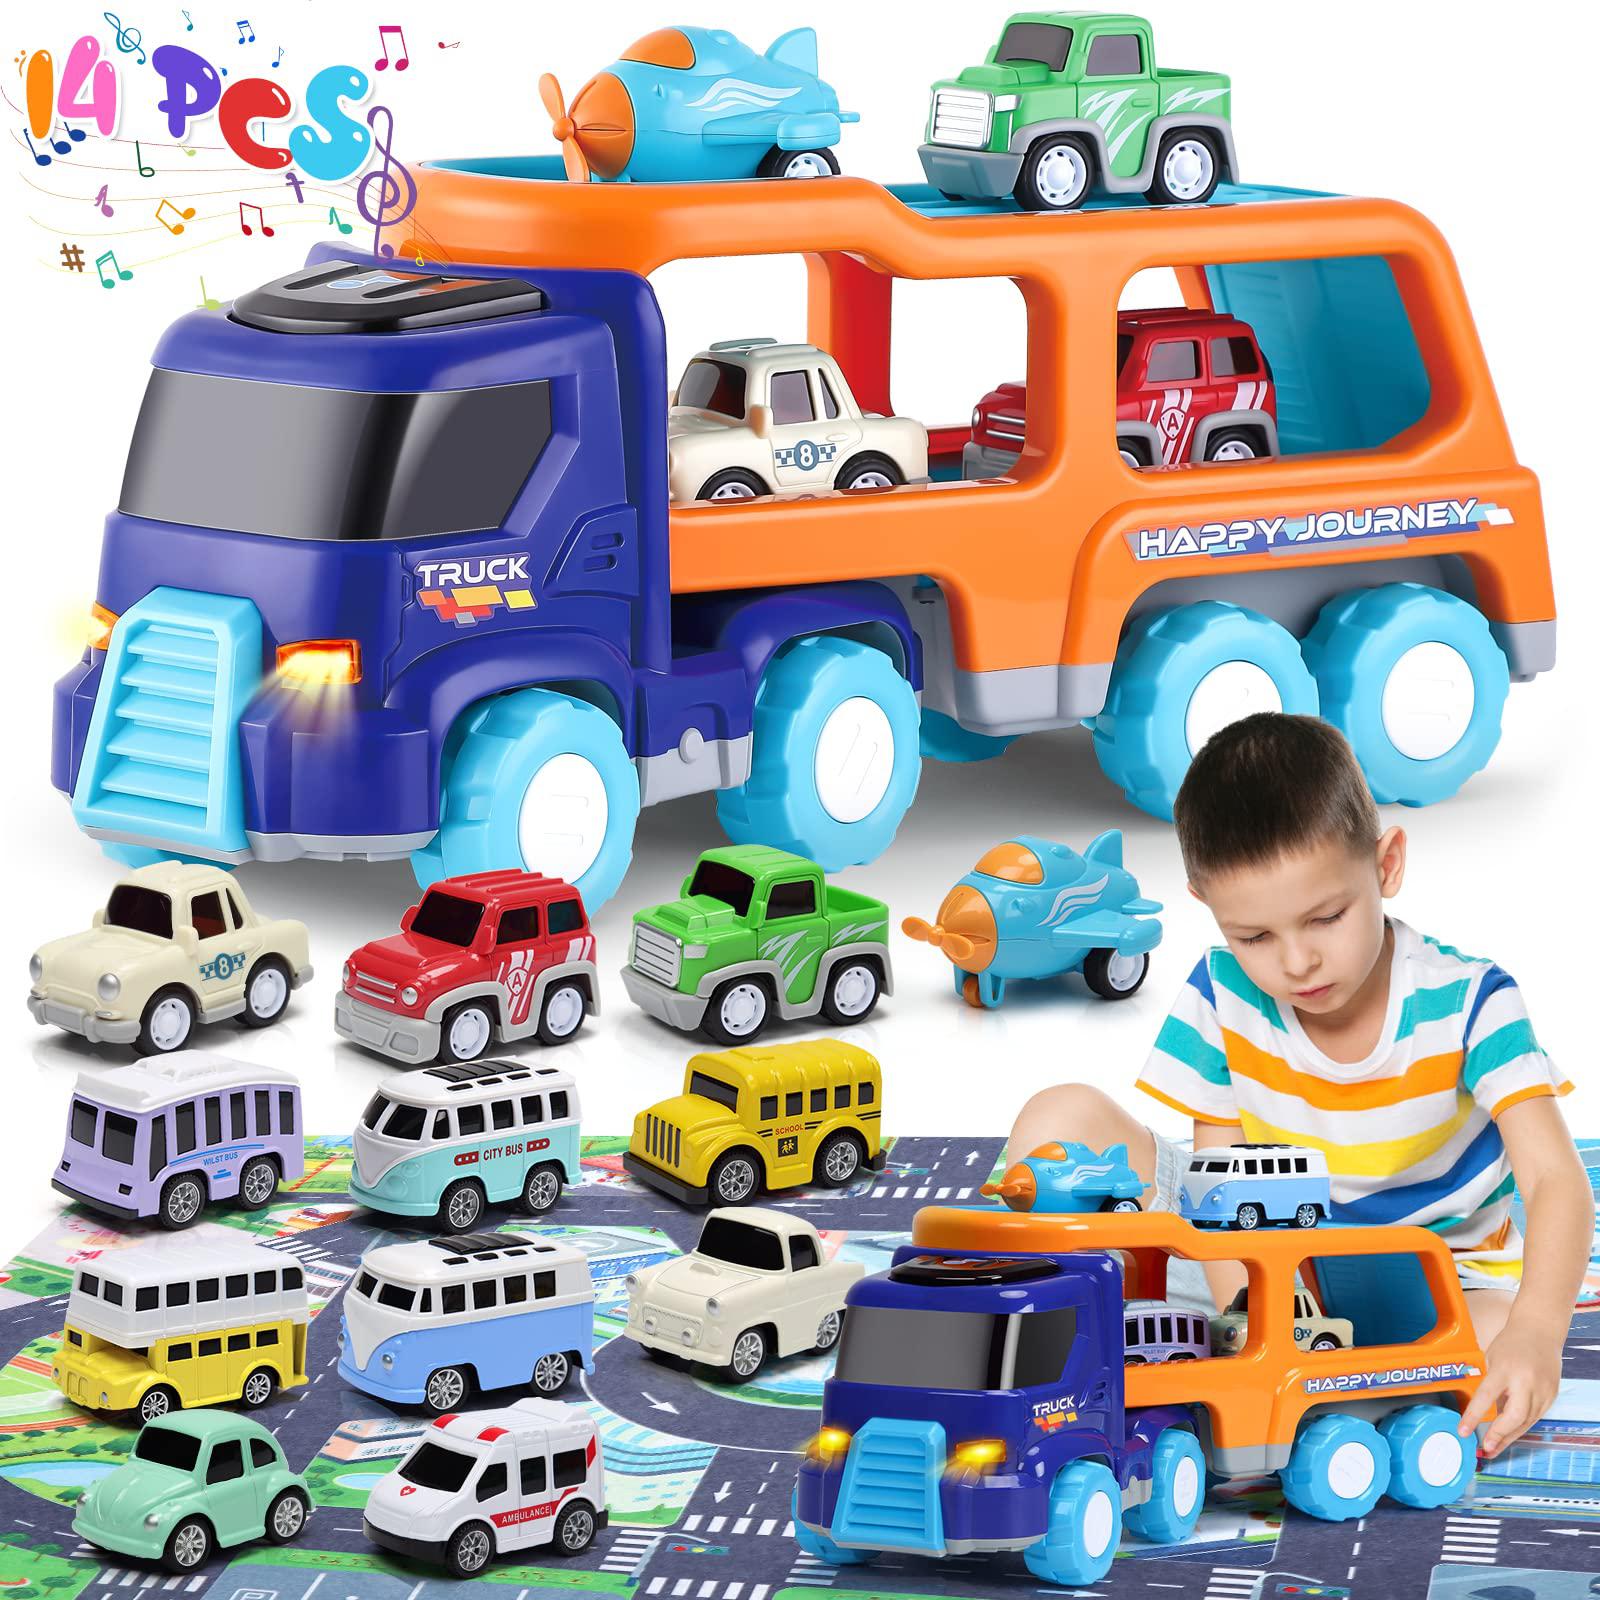 ThinkMax 14pcs toy trucks car for 3 4 5 year old toddlers boys girls,transport car carrier truck pull back vehicles toys, car trucks t